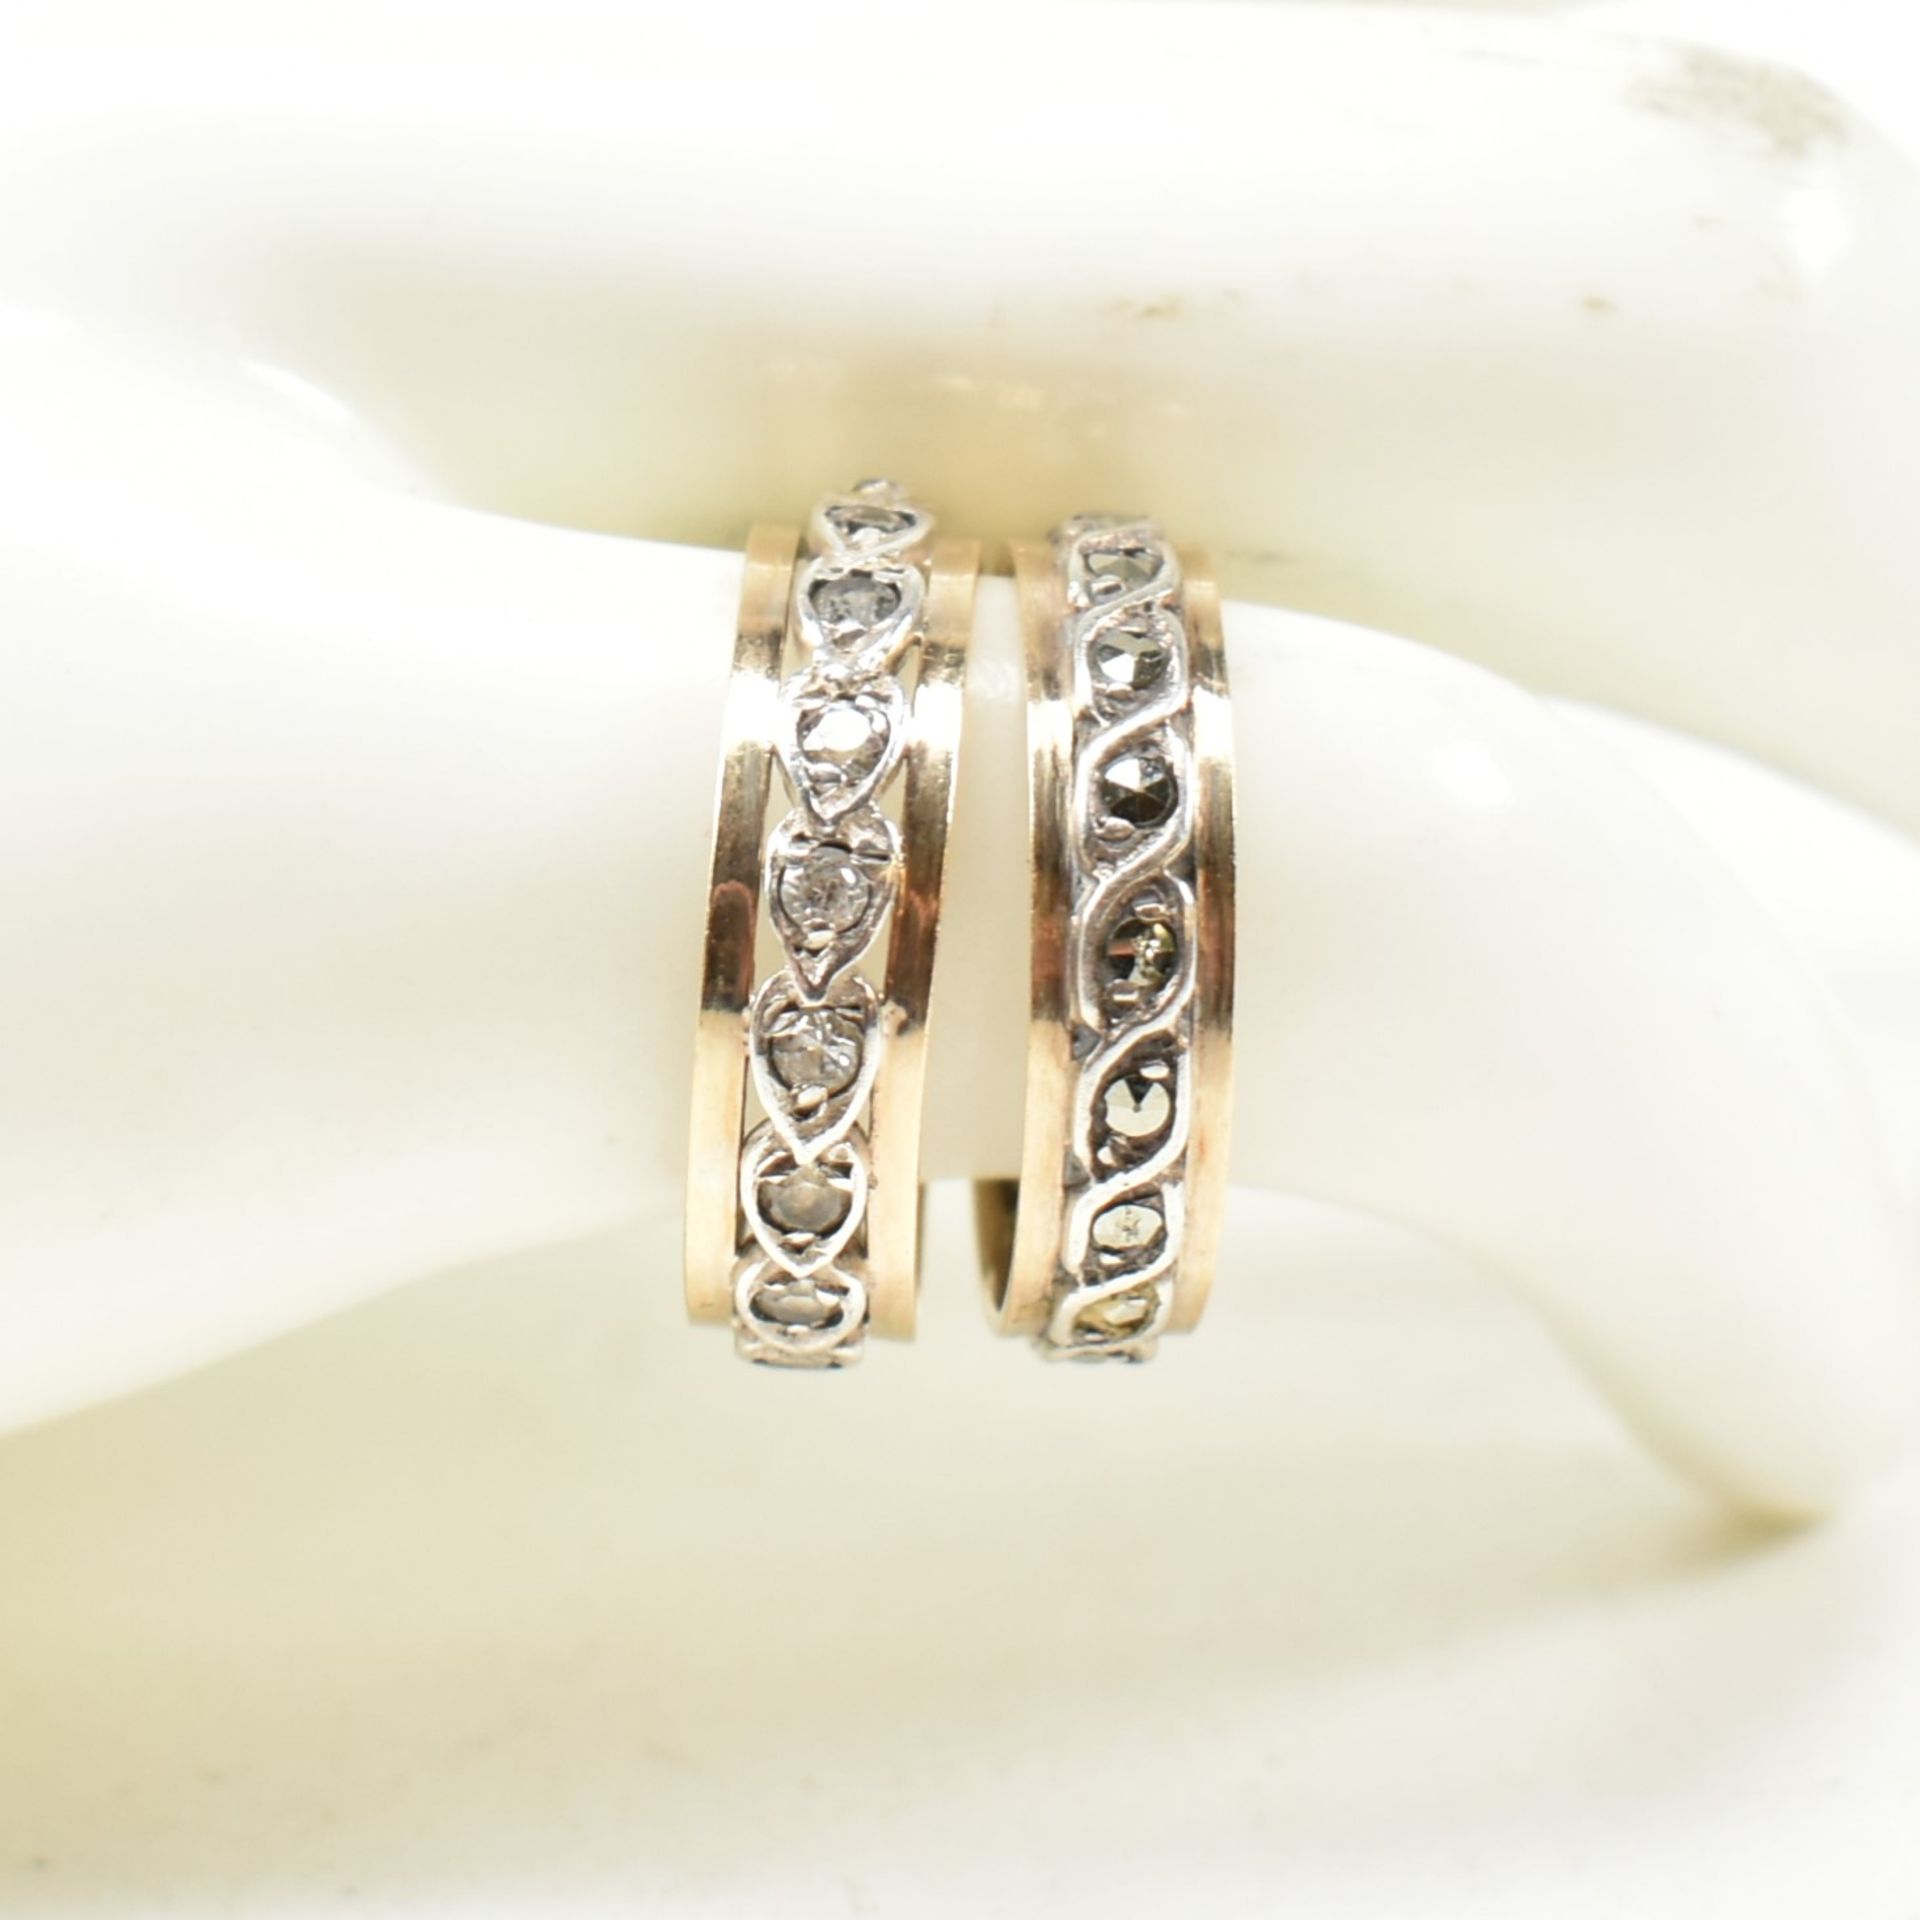 TWO 9CT GOLD & SILVER MARCASITE & WHITE STONE BAND RINGS - Image 5 of 5